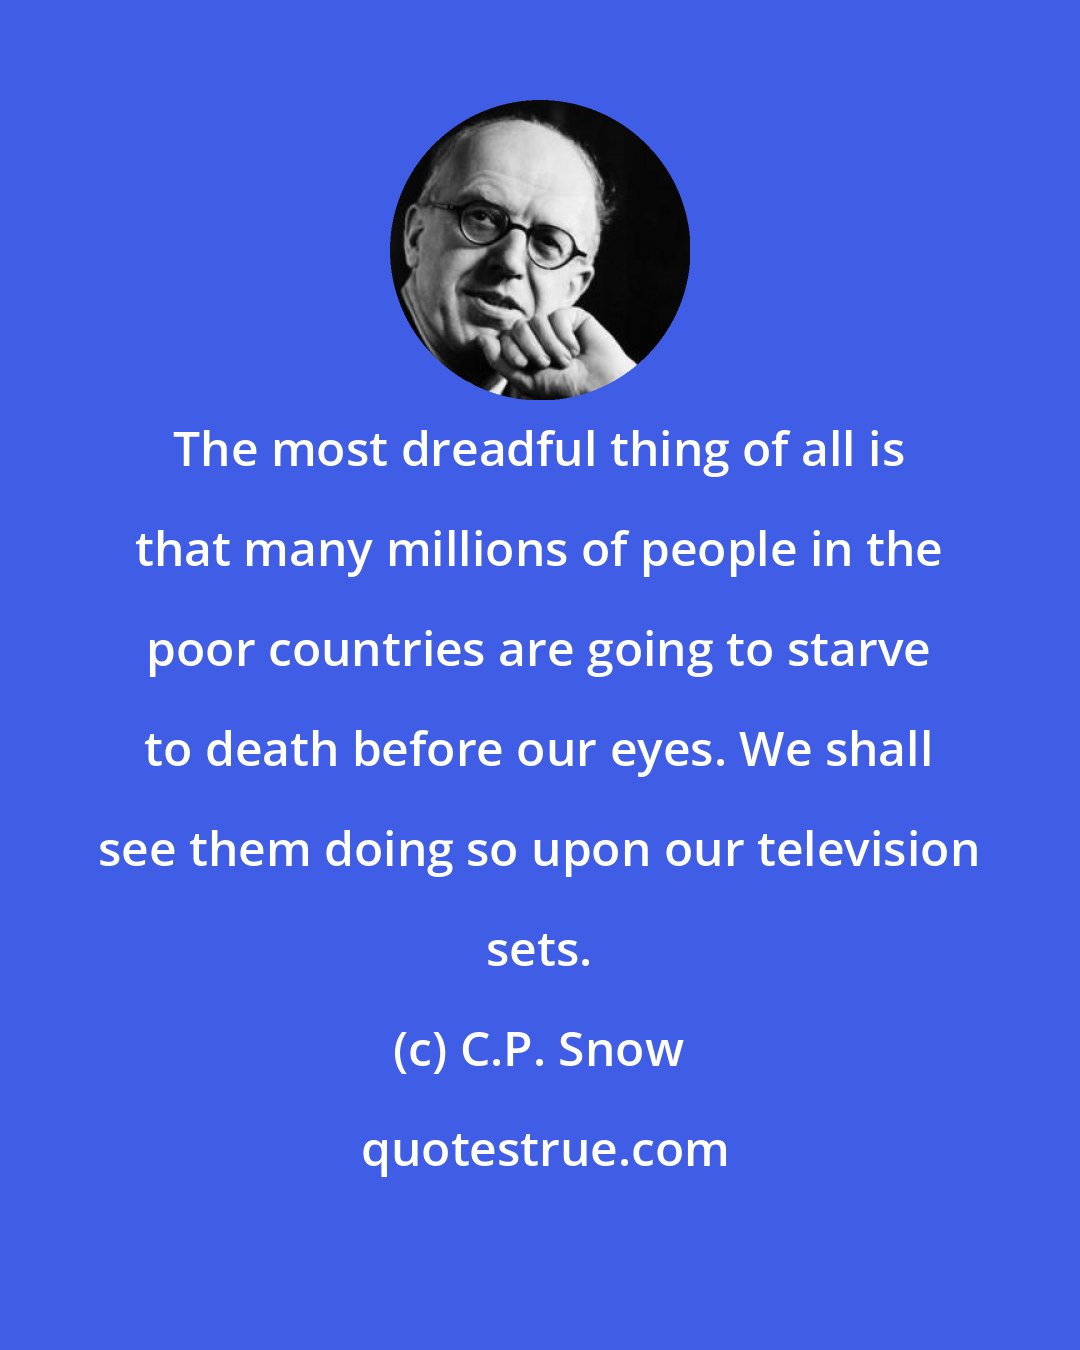 C.P. Snow: The most dreadful thing of all is that many millions of people in the poor countries are going to starve to death before our eyes. We shall see them doing so upon our television sets.